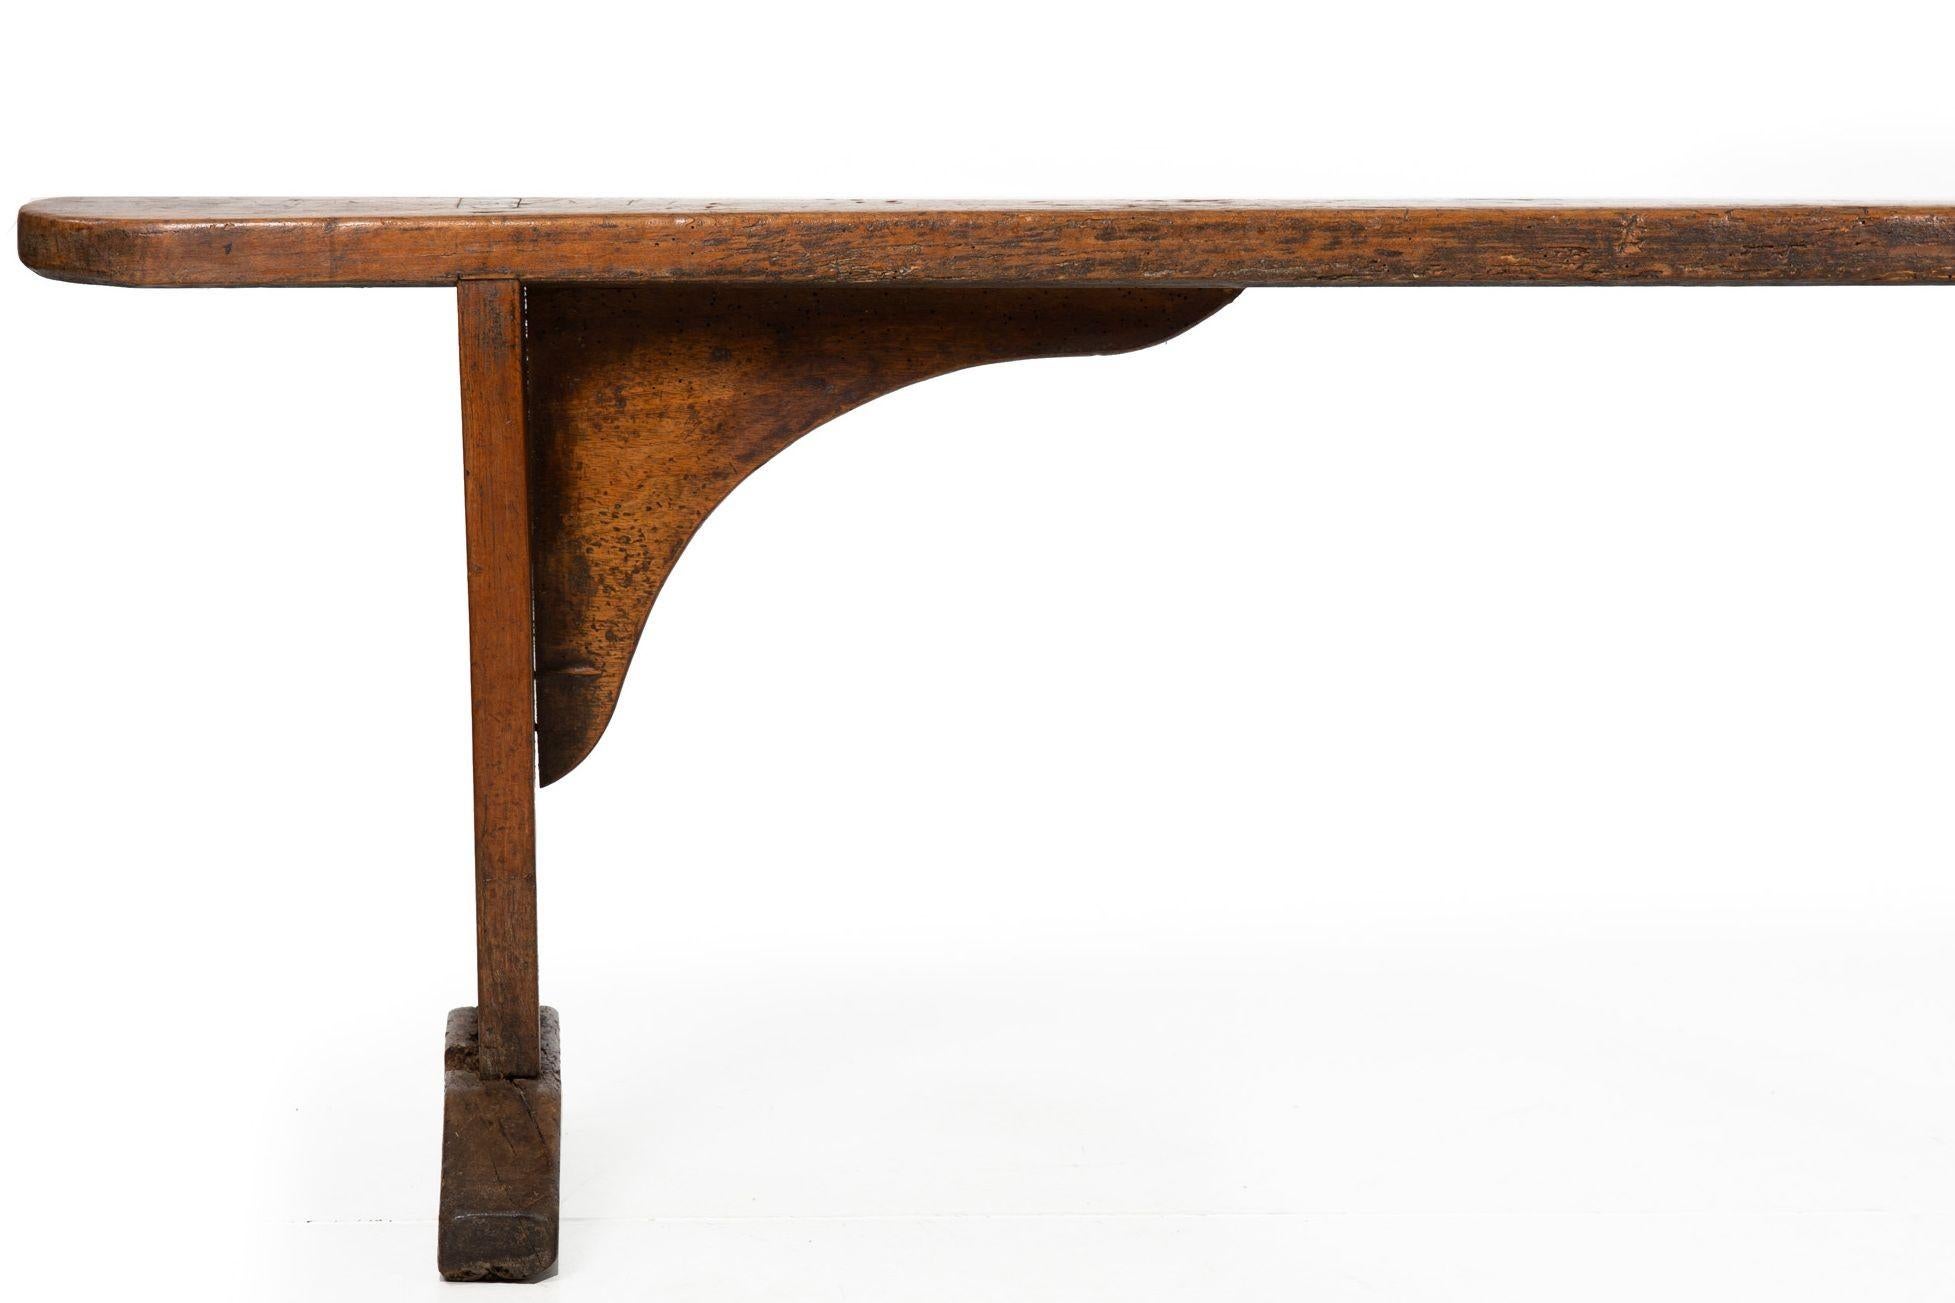 circa 1750 English Georgian Patinated and Worn Elm Trestle Bench For Sale 2